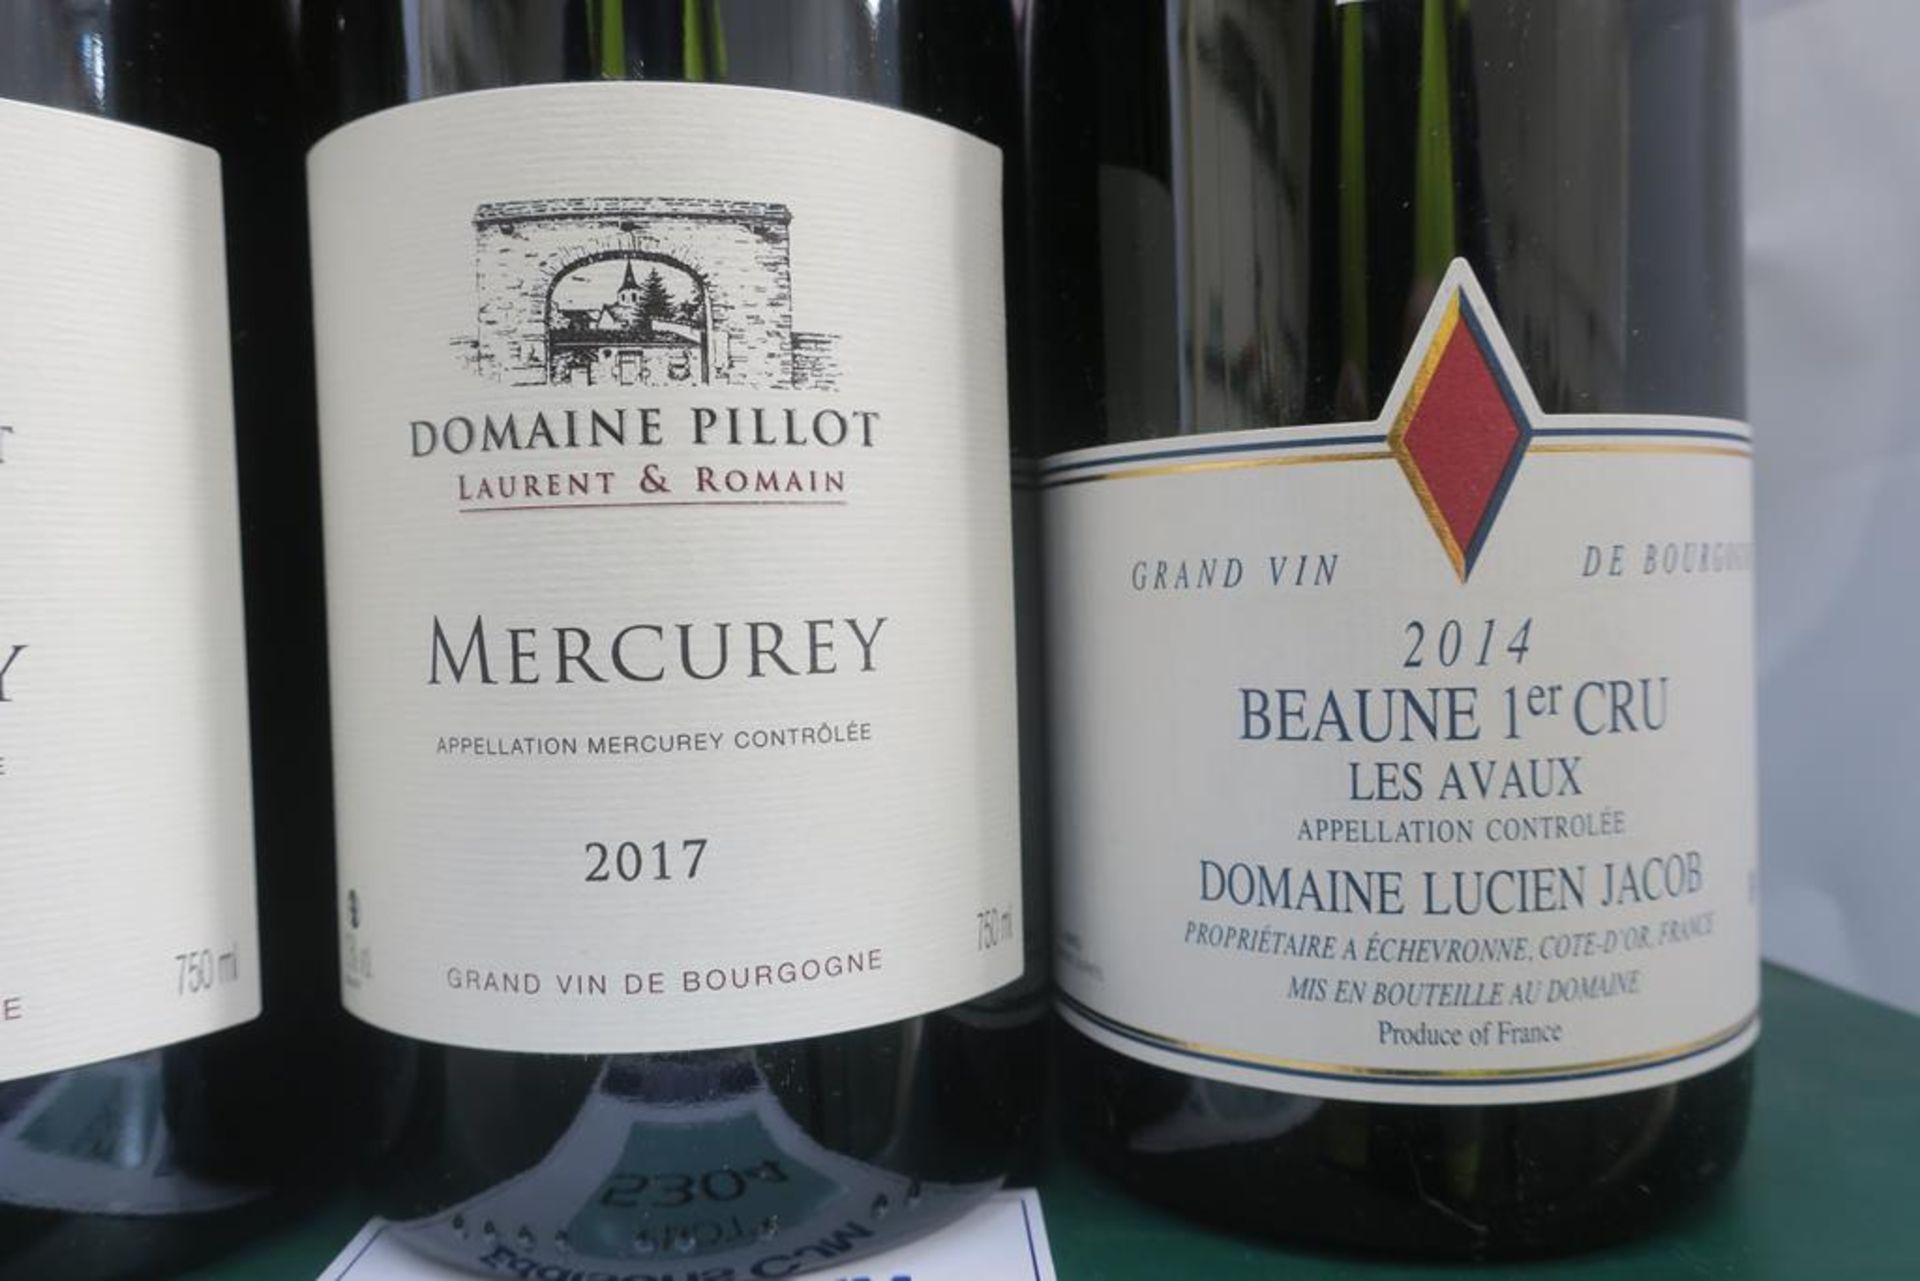 Domaine Pillot Mercurey and Domaine Lucien Wine - Image 2 of 3